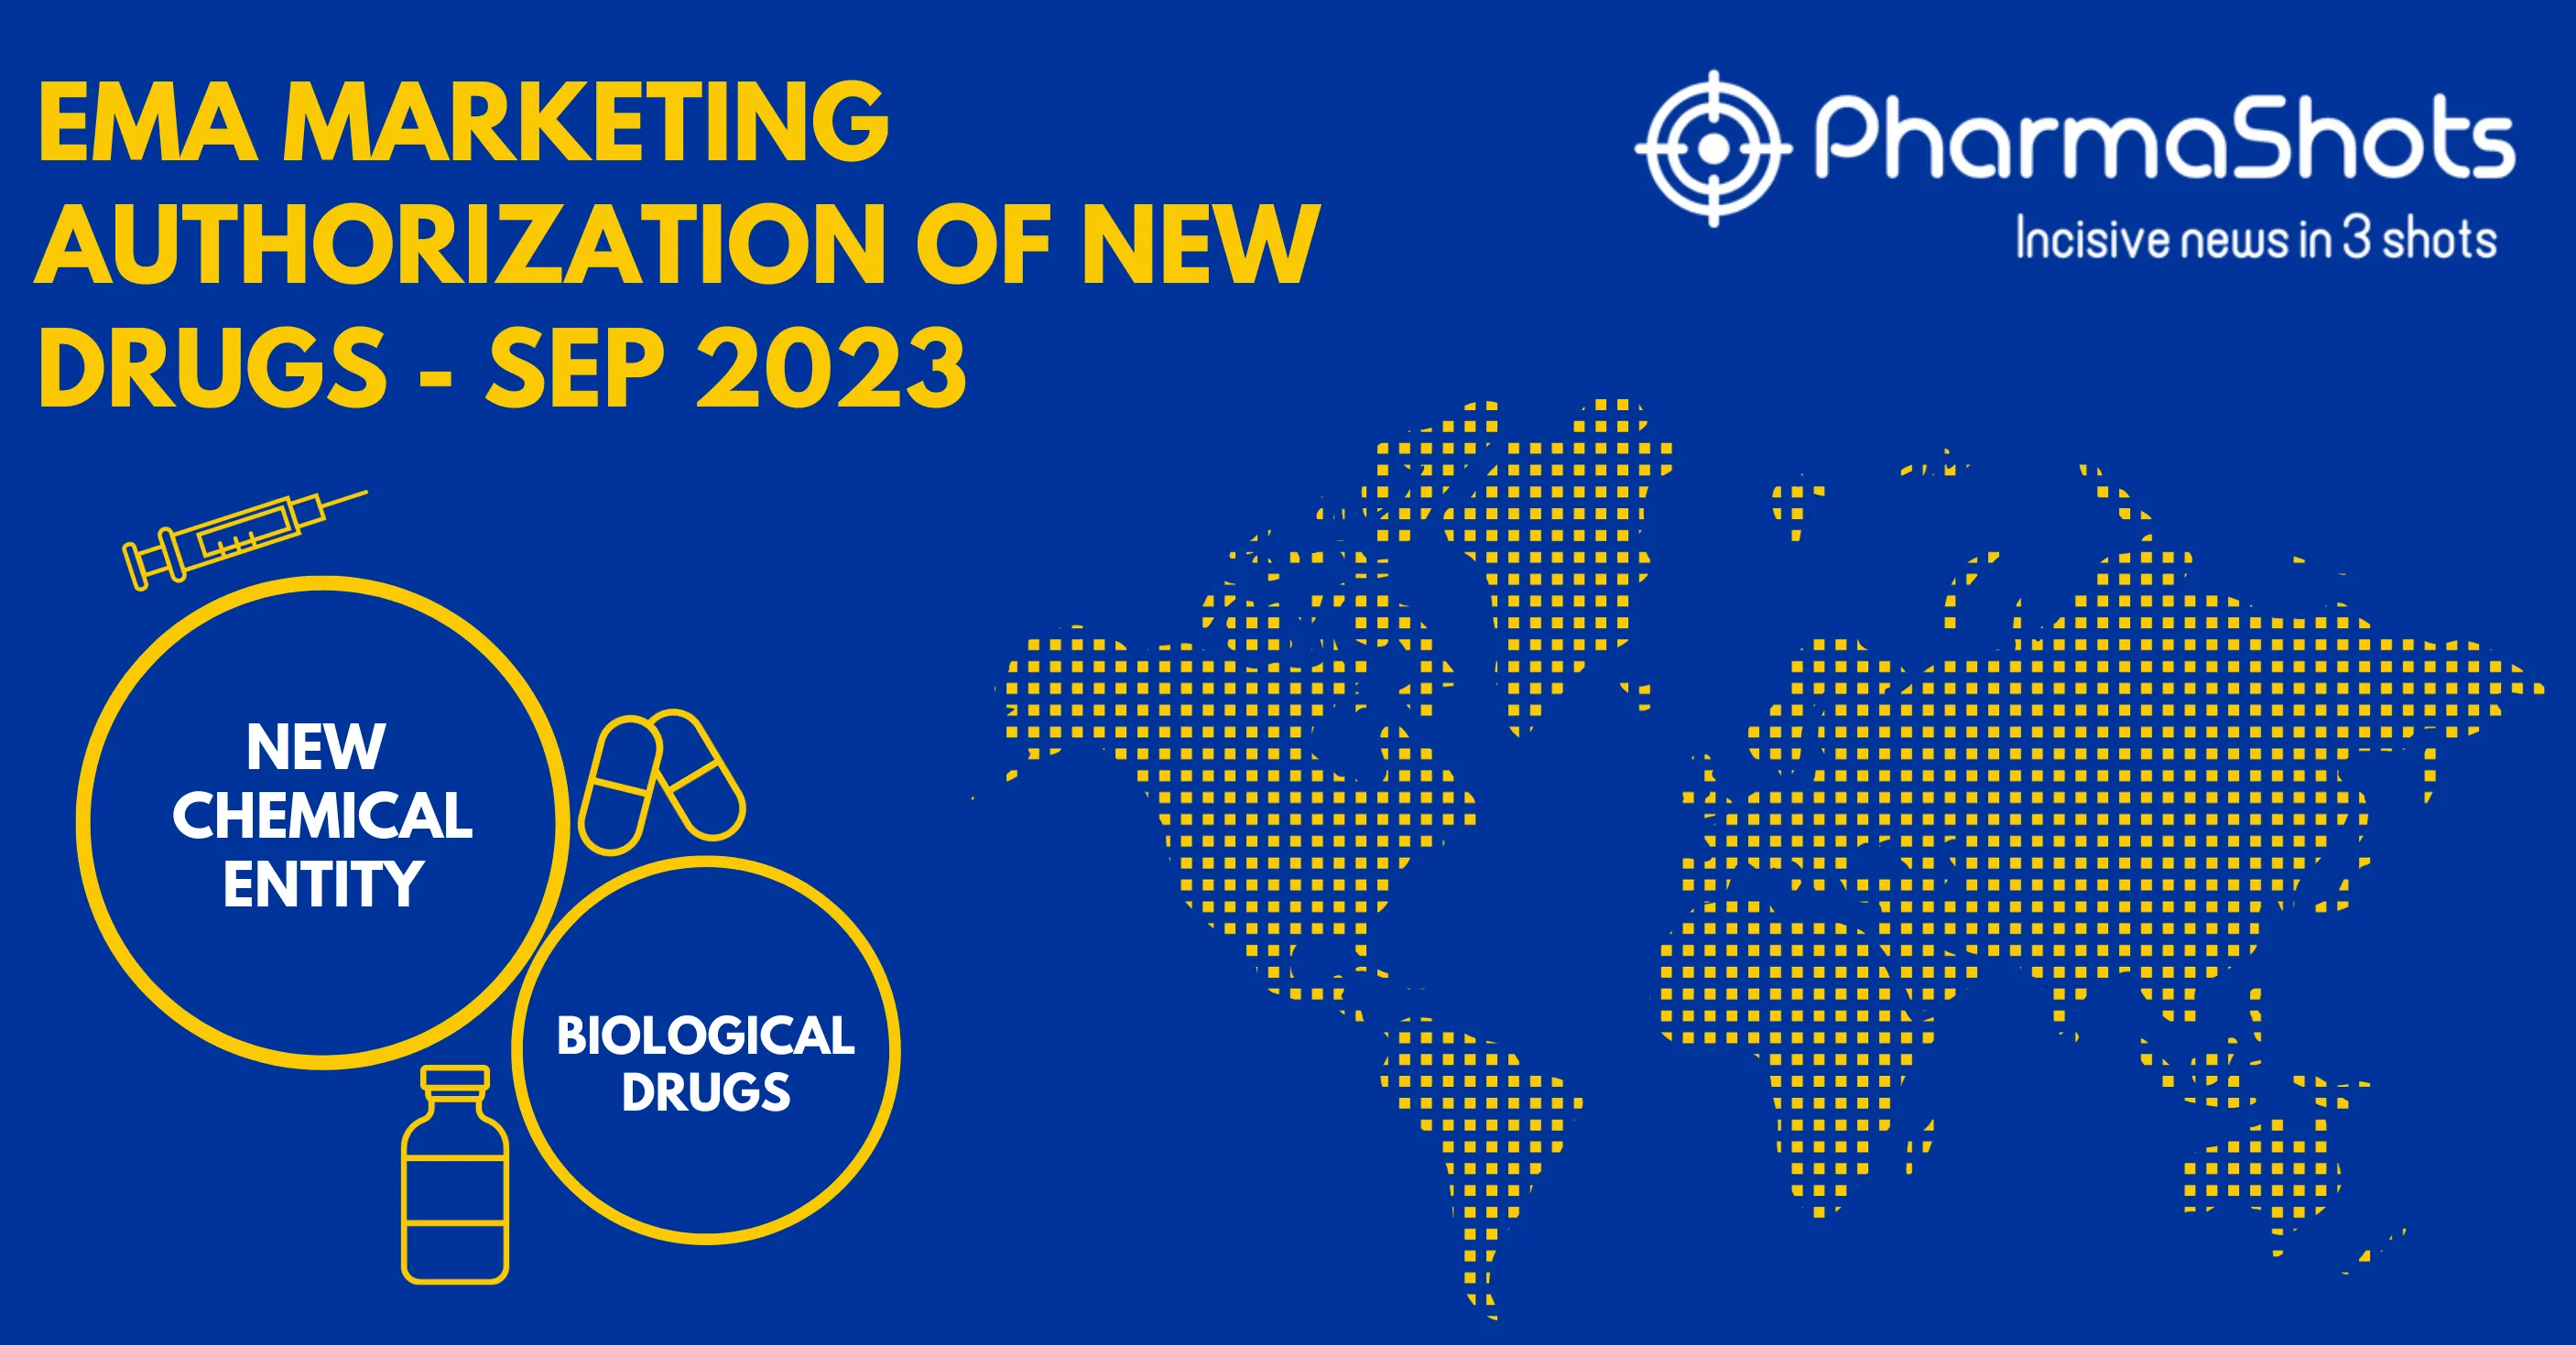 Insights+: EMA Marketing Authorization of New Drugs in September 2023